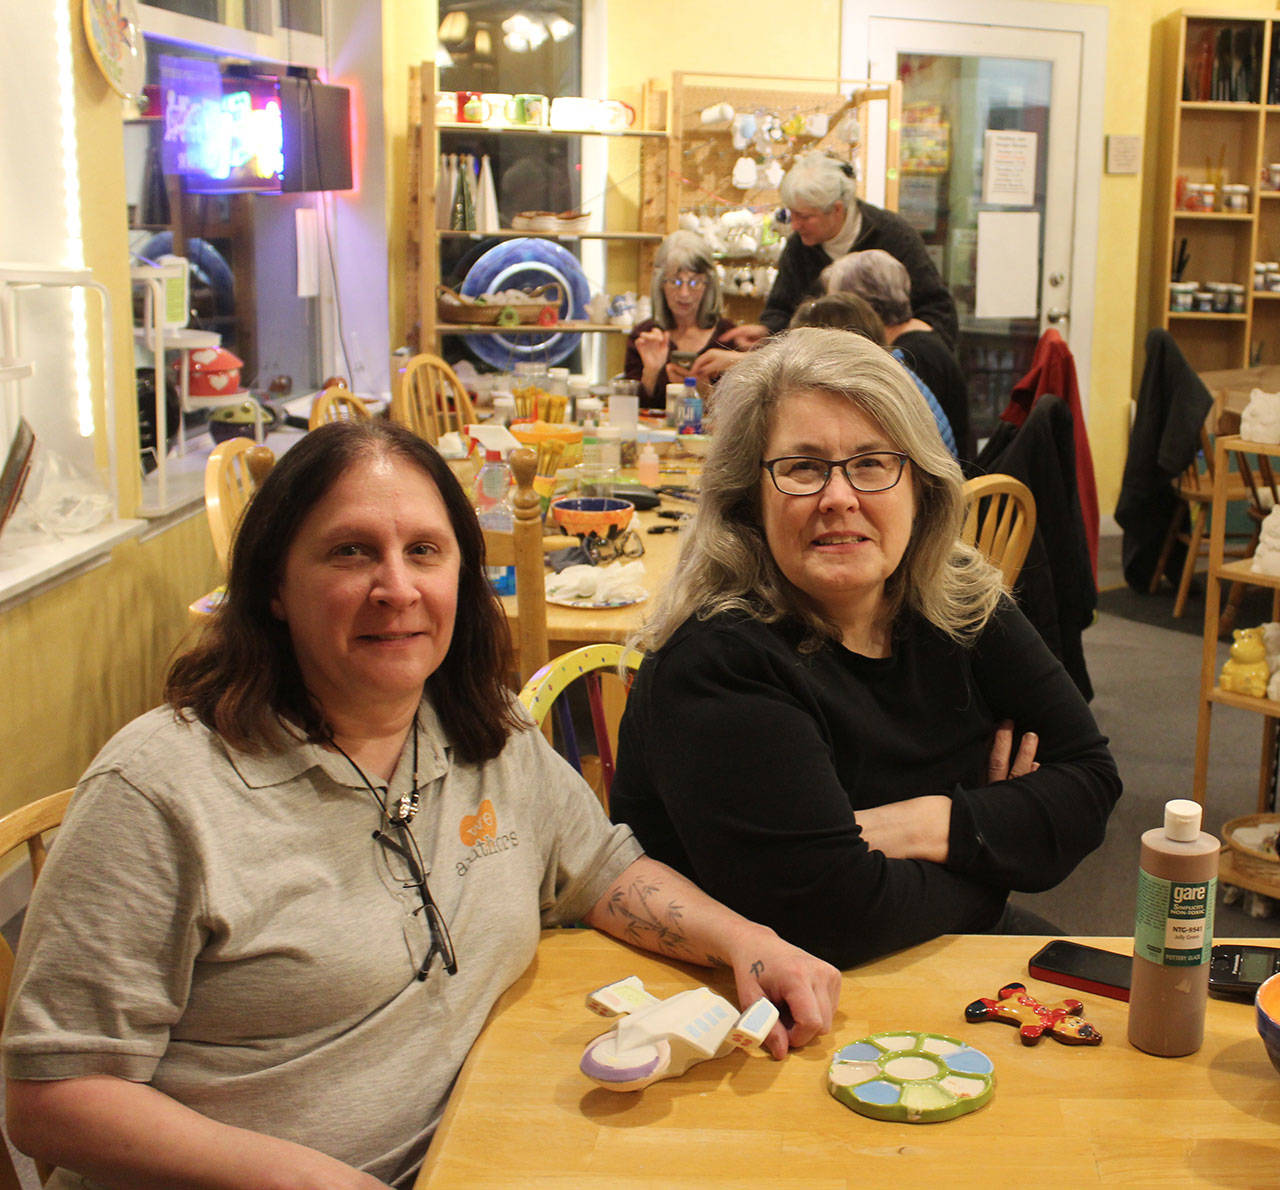 Longtime Whidbey Art Escape owner Tina Beard, right, chats with new owner Carol Evans during a recent Ladies Night session. (Photo by Patricia Guthrie/Whidbey News Group)